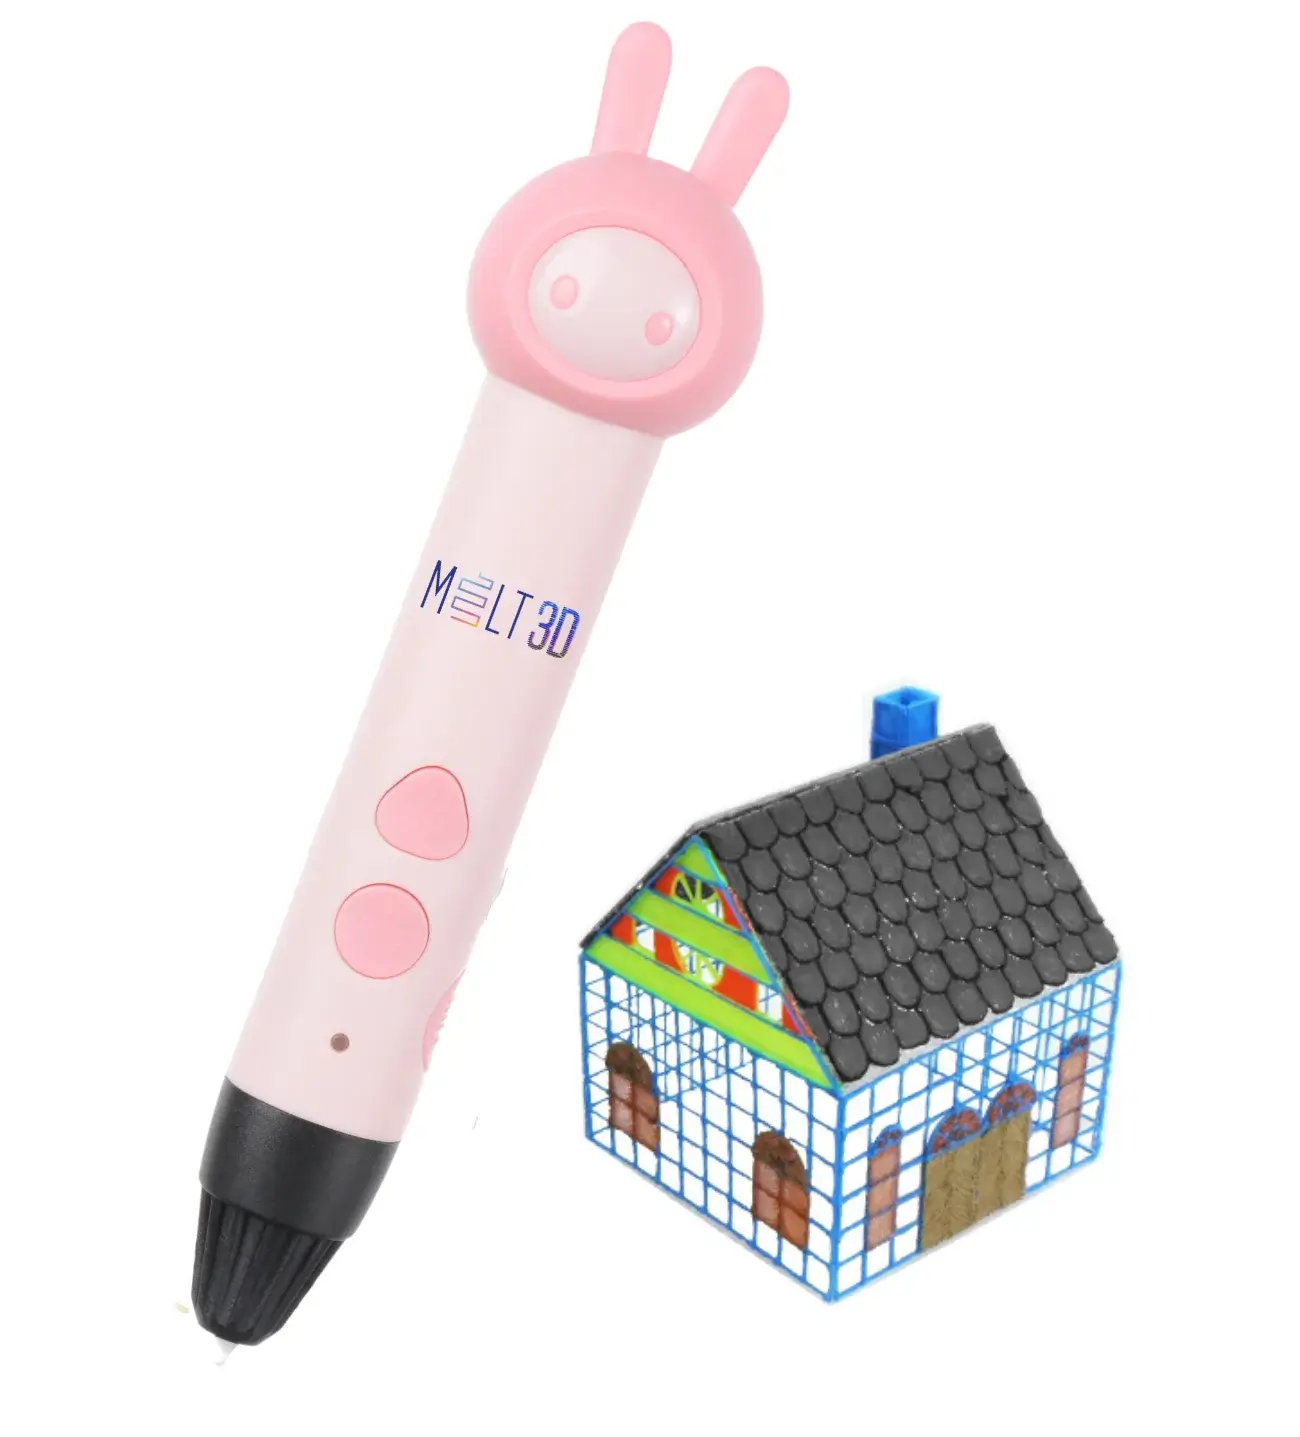 Melt3D The Crafter 3D Pen Inspire Kids Imagination with Bunny Designs -  protomont